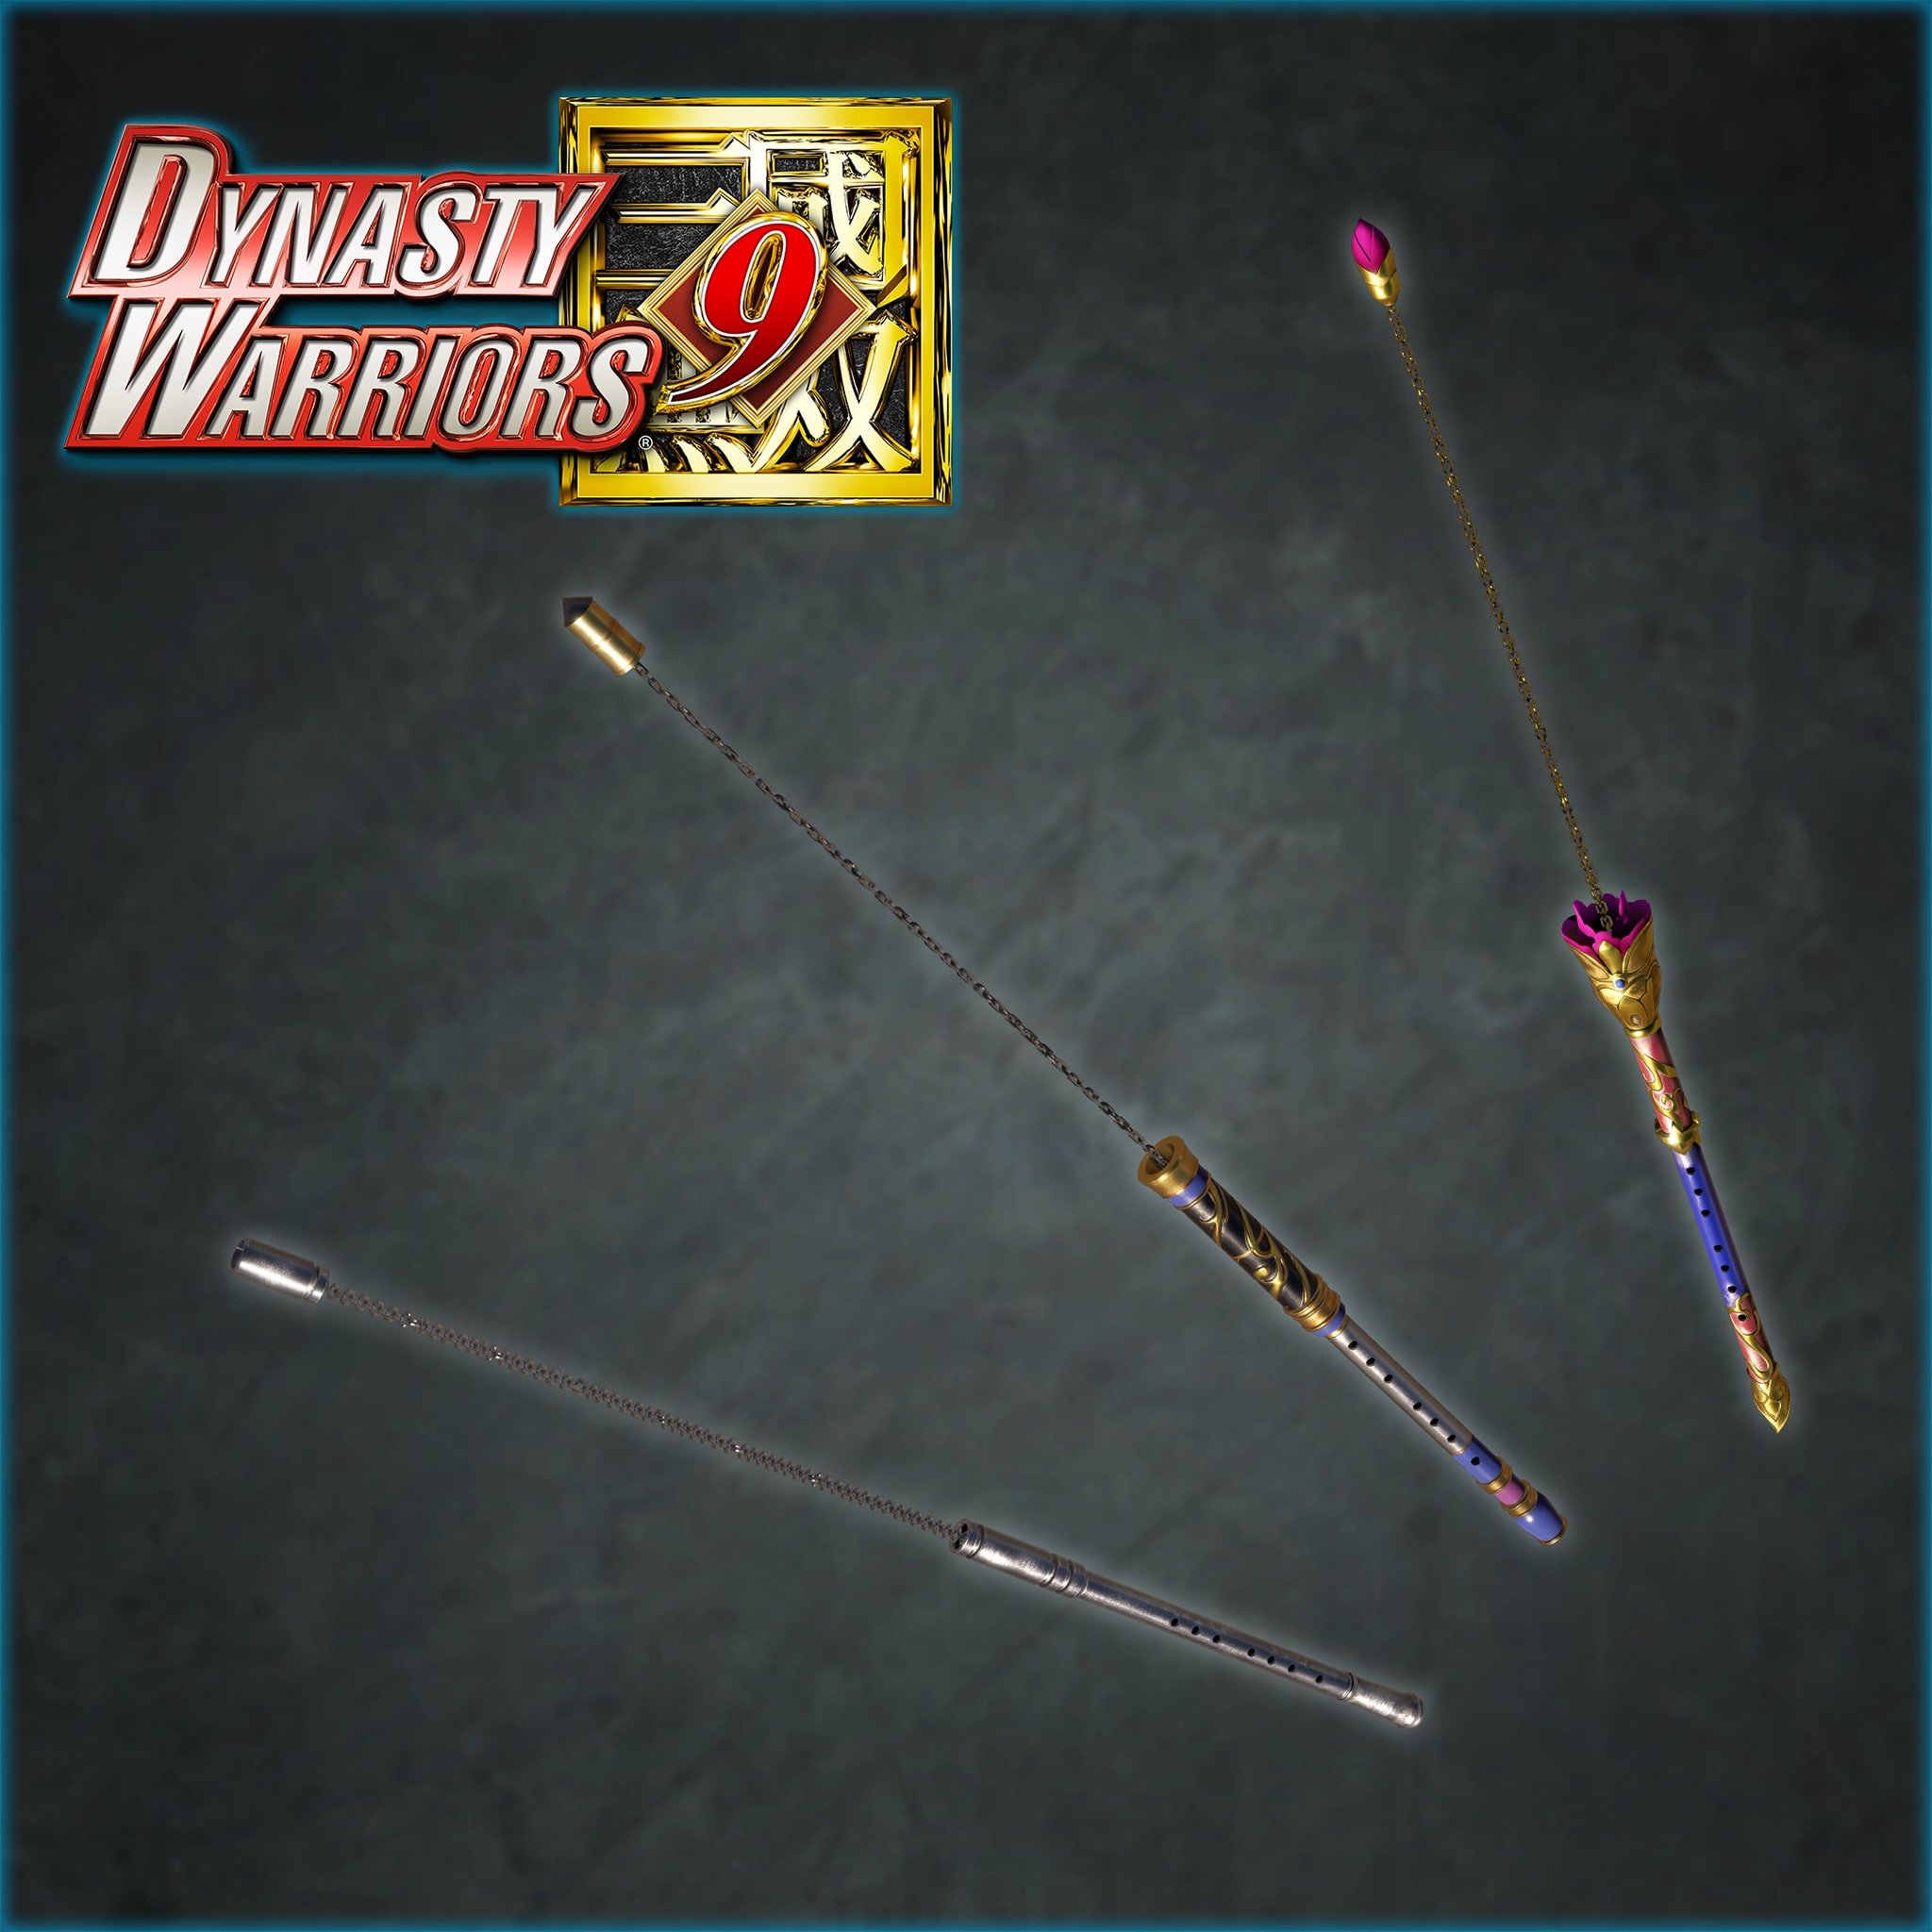 DYNASTY WARRIORS 9: Additional Weapon 'Iron Flute'